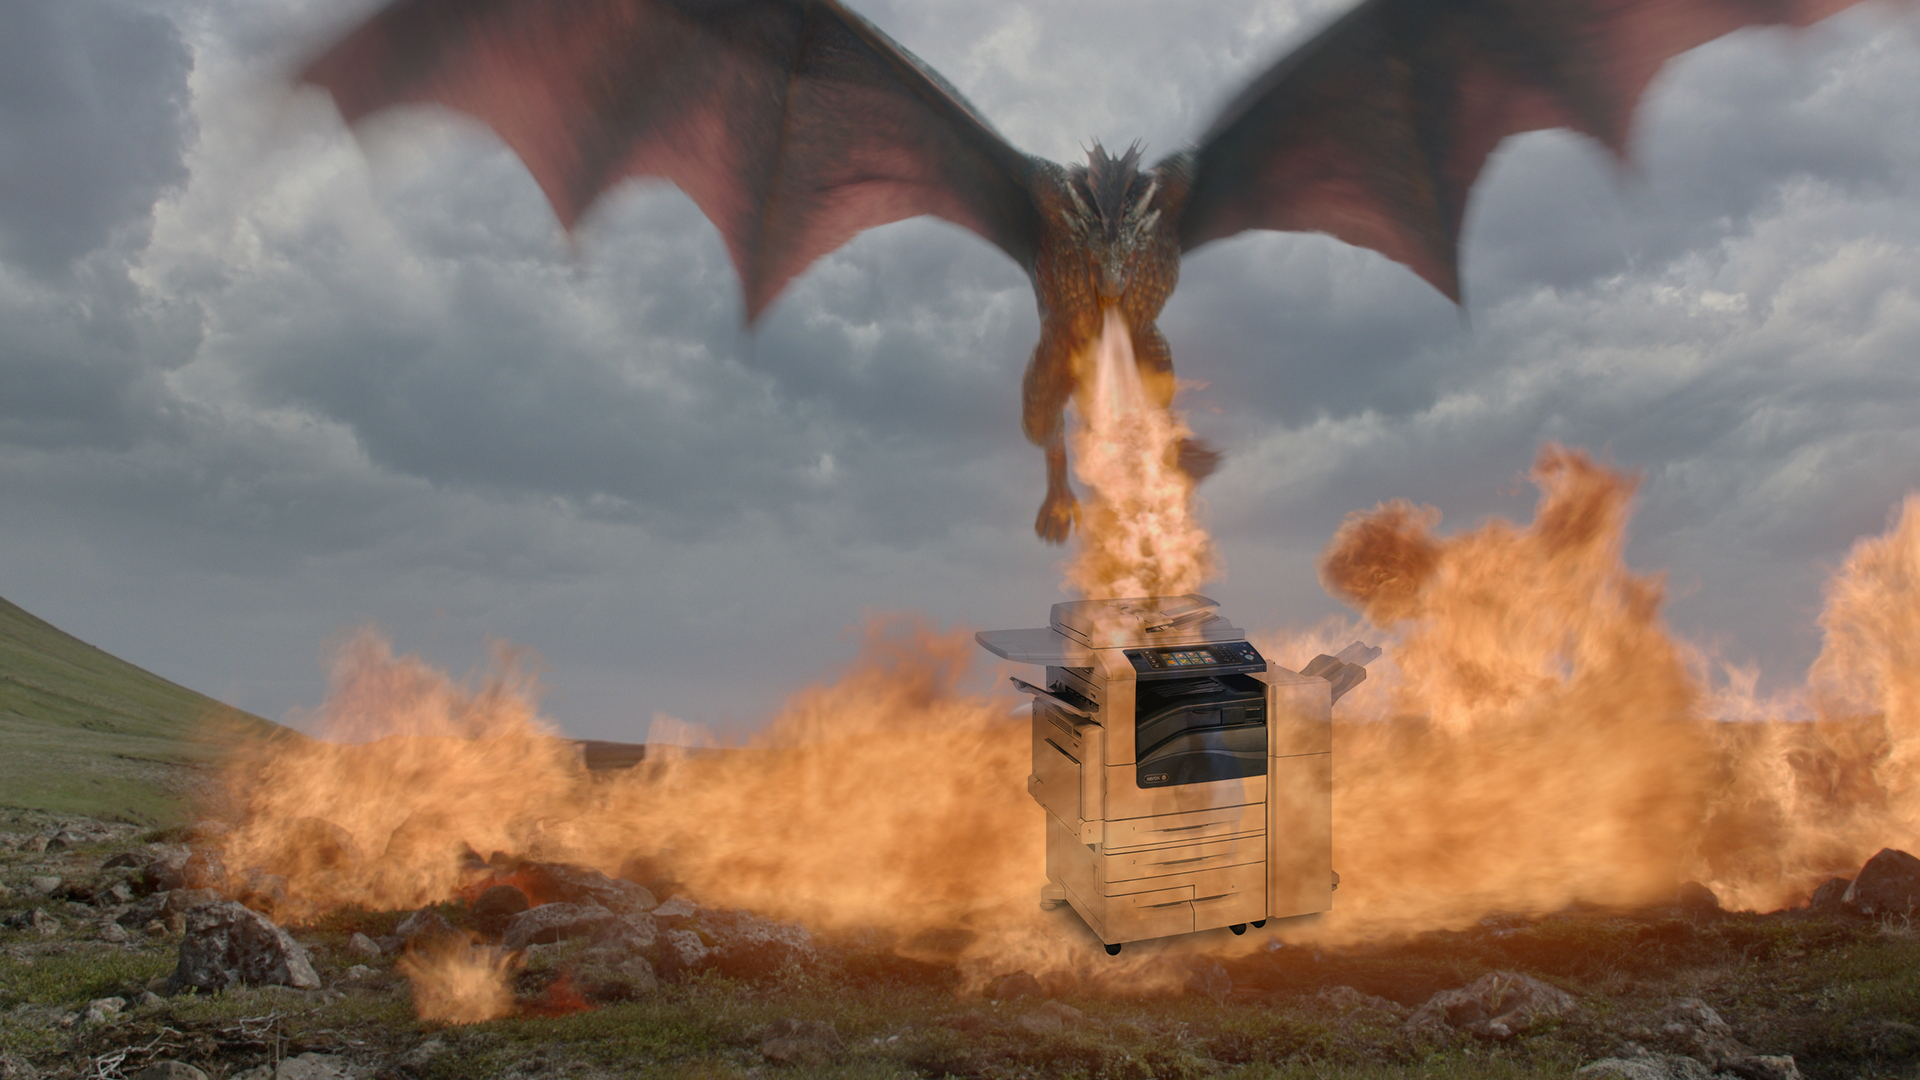 Does Your Printing Environment Feel Like Game of Thrones…Or is it More Like Groans?